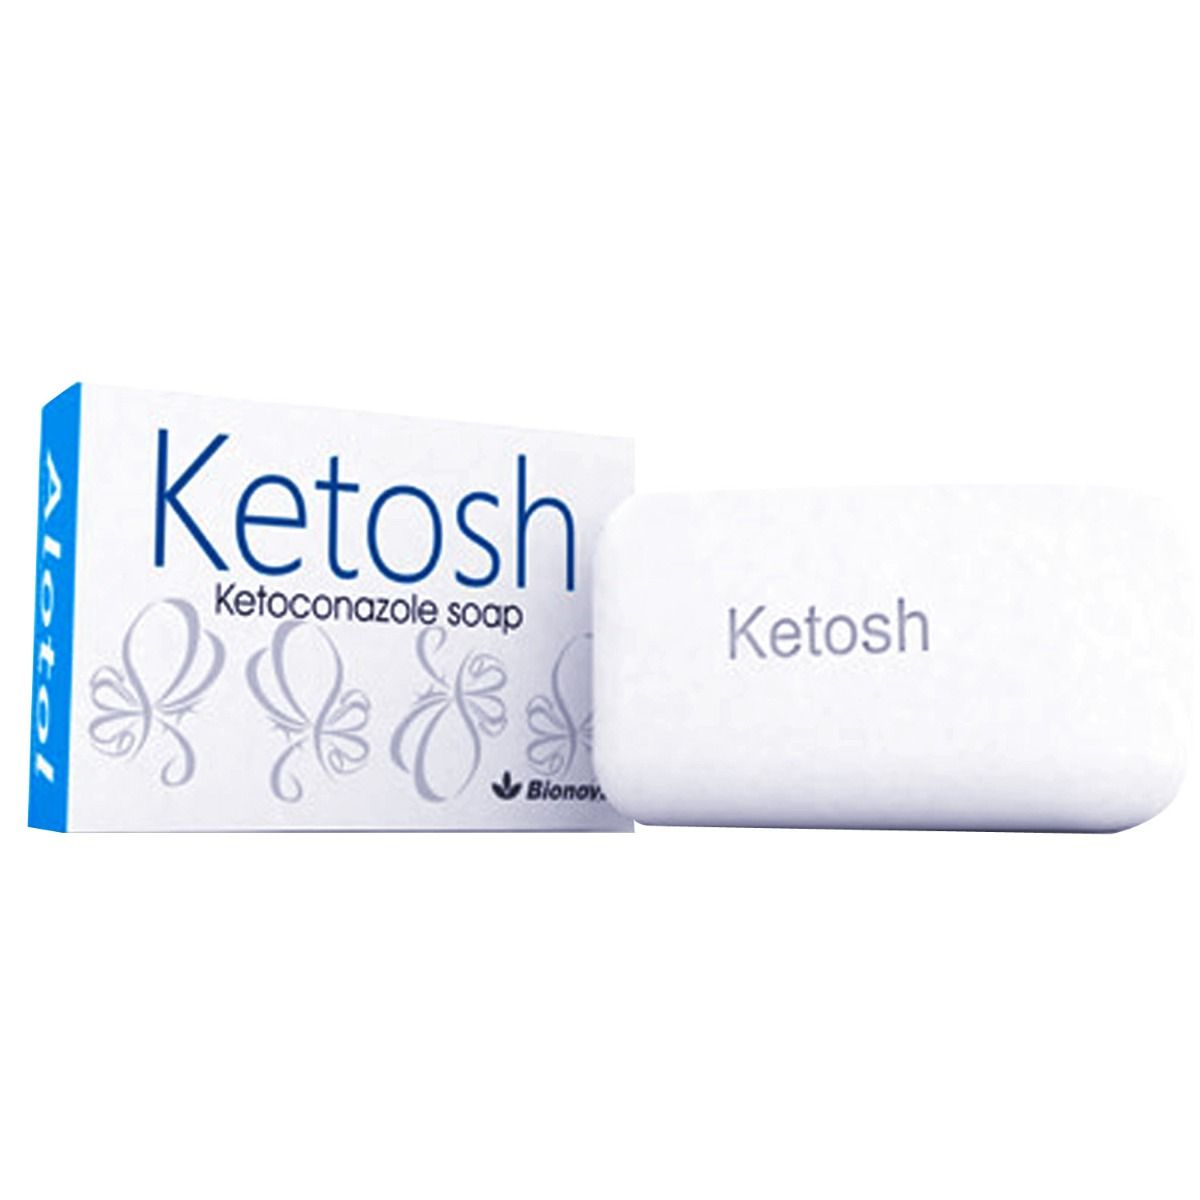 Ketosh Soap, 75 gm, Pack of 1 